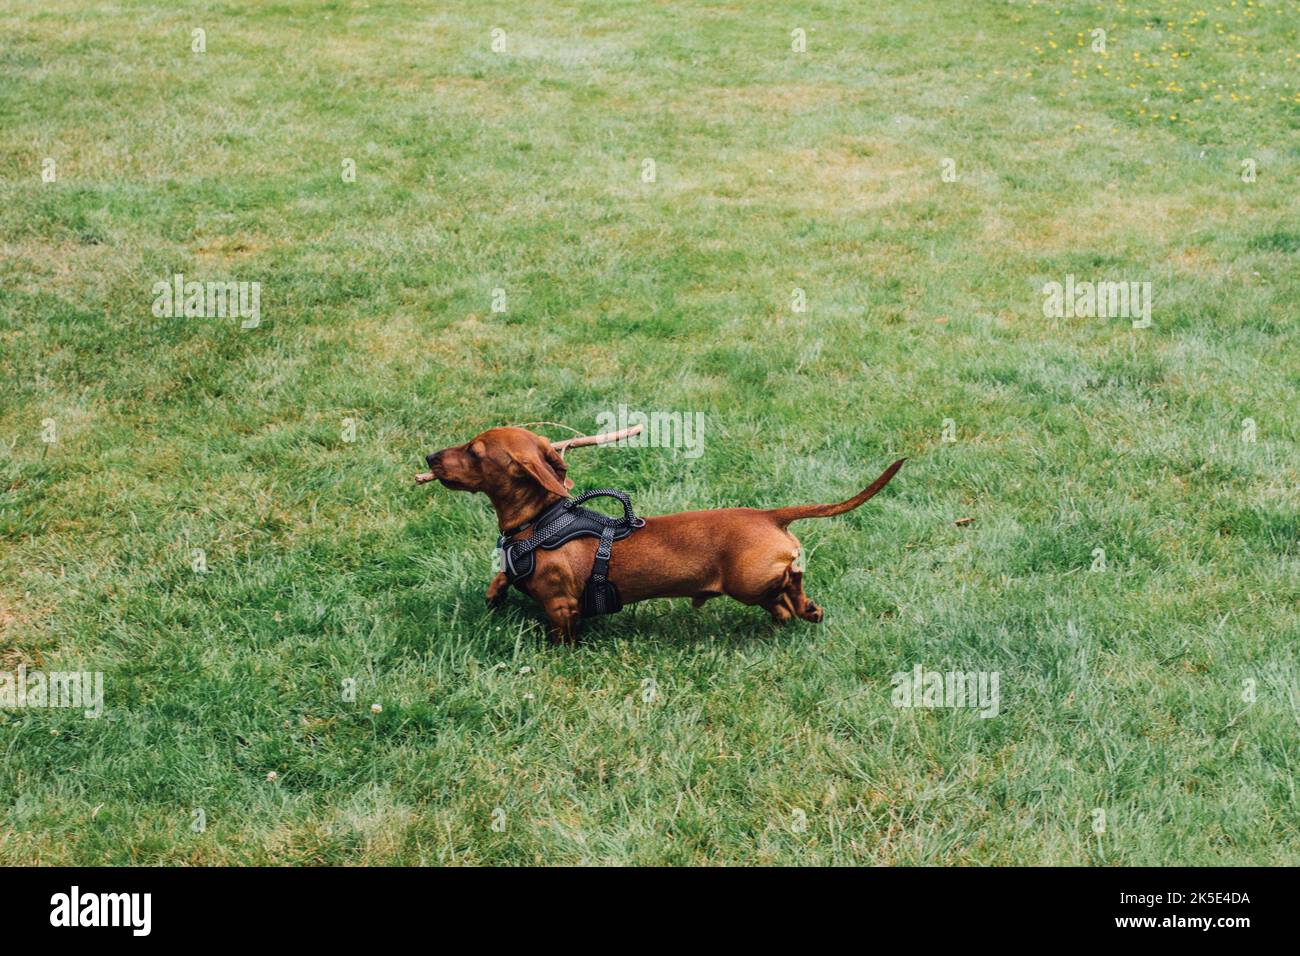 harness-wearing daschund dog with big stick in mouth, on grass Stock Photo